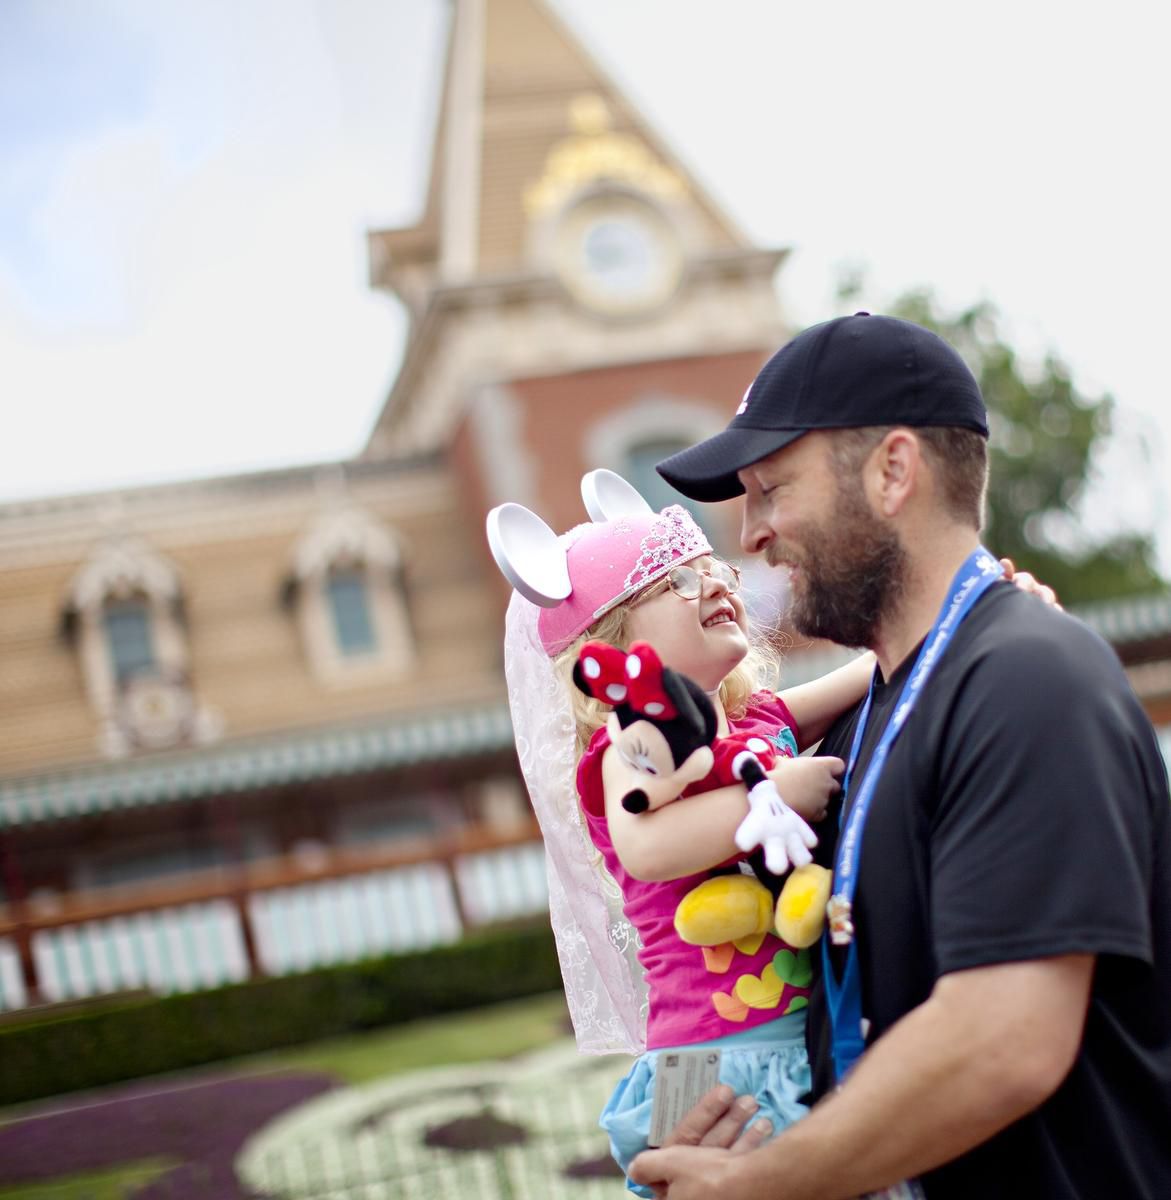 Disney Theme Park Price Father Holding Daughter with Souvenirs